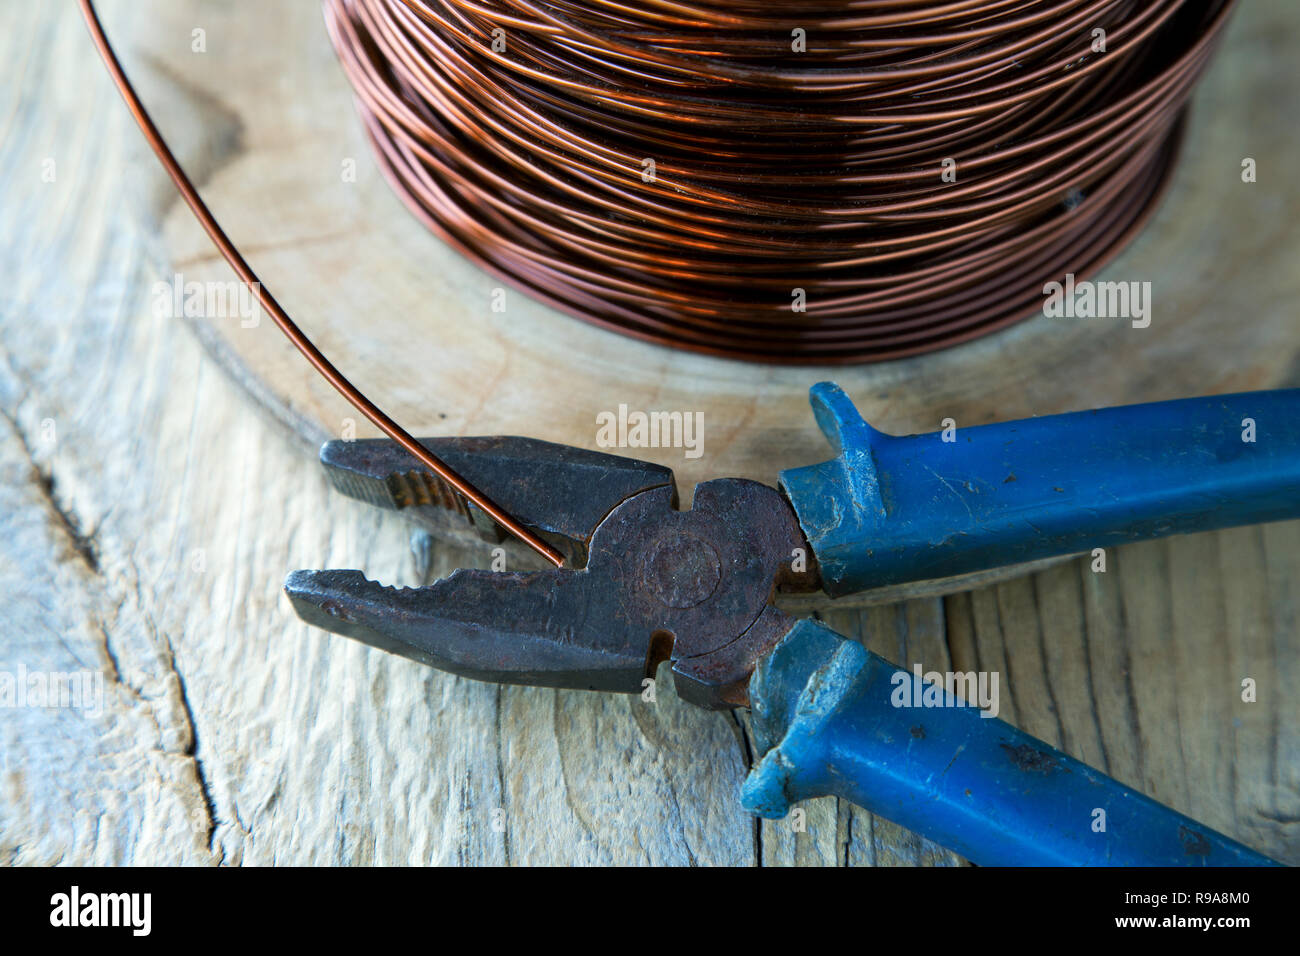 coil of copper wire and pliers close-up Stock Photo